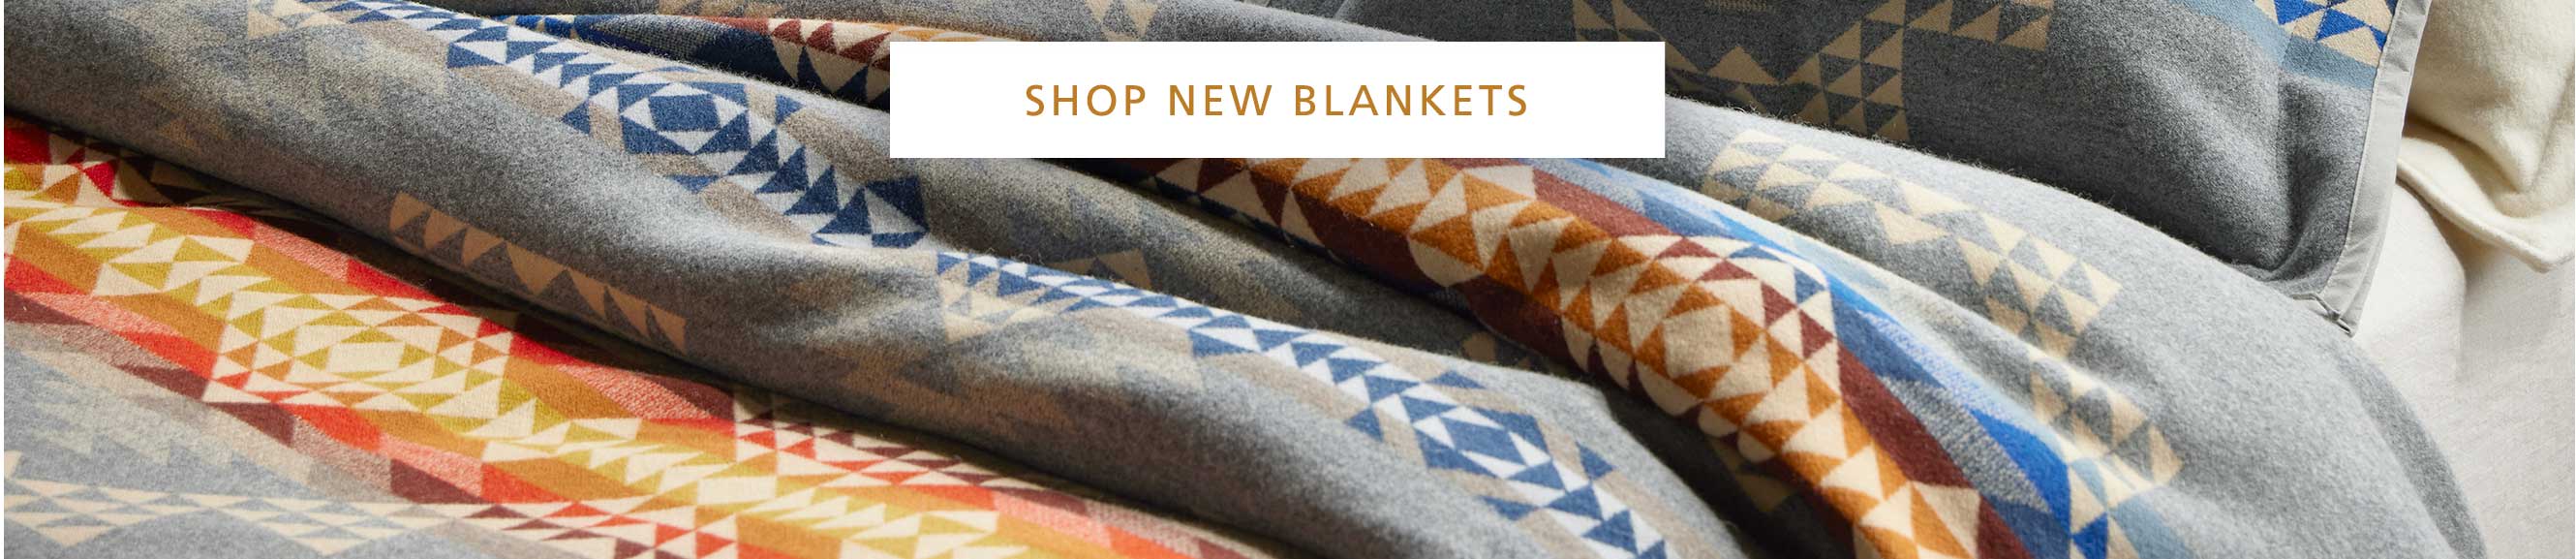 Shop New Blankets